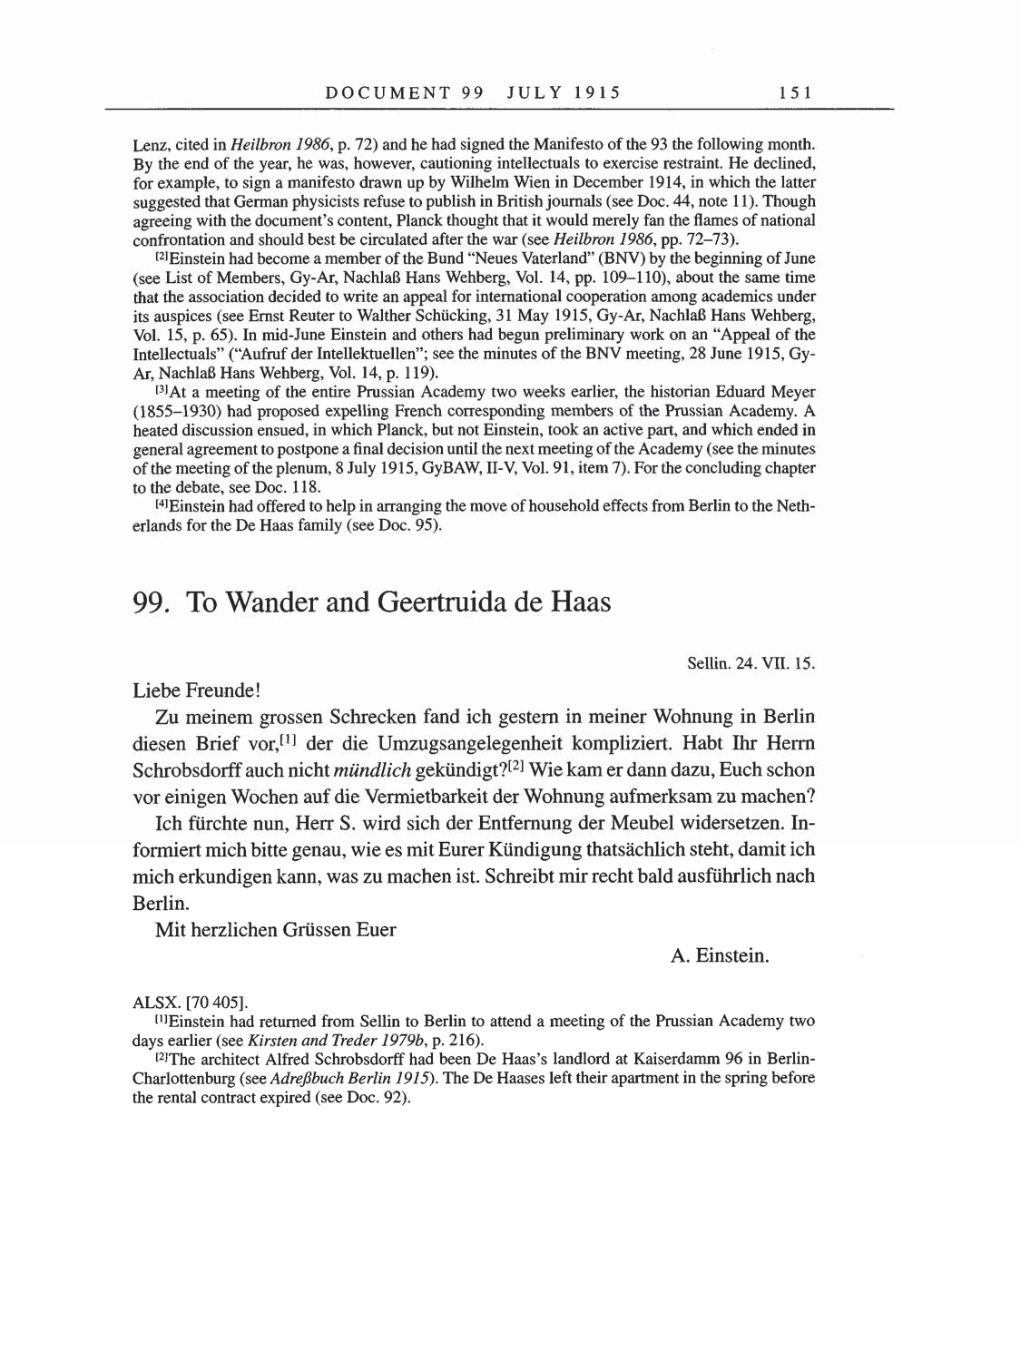 Volume 8, Part A: The Berlin Years: Correspondence 1914-1917 page 151